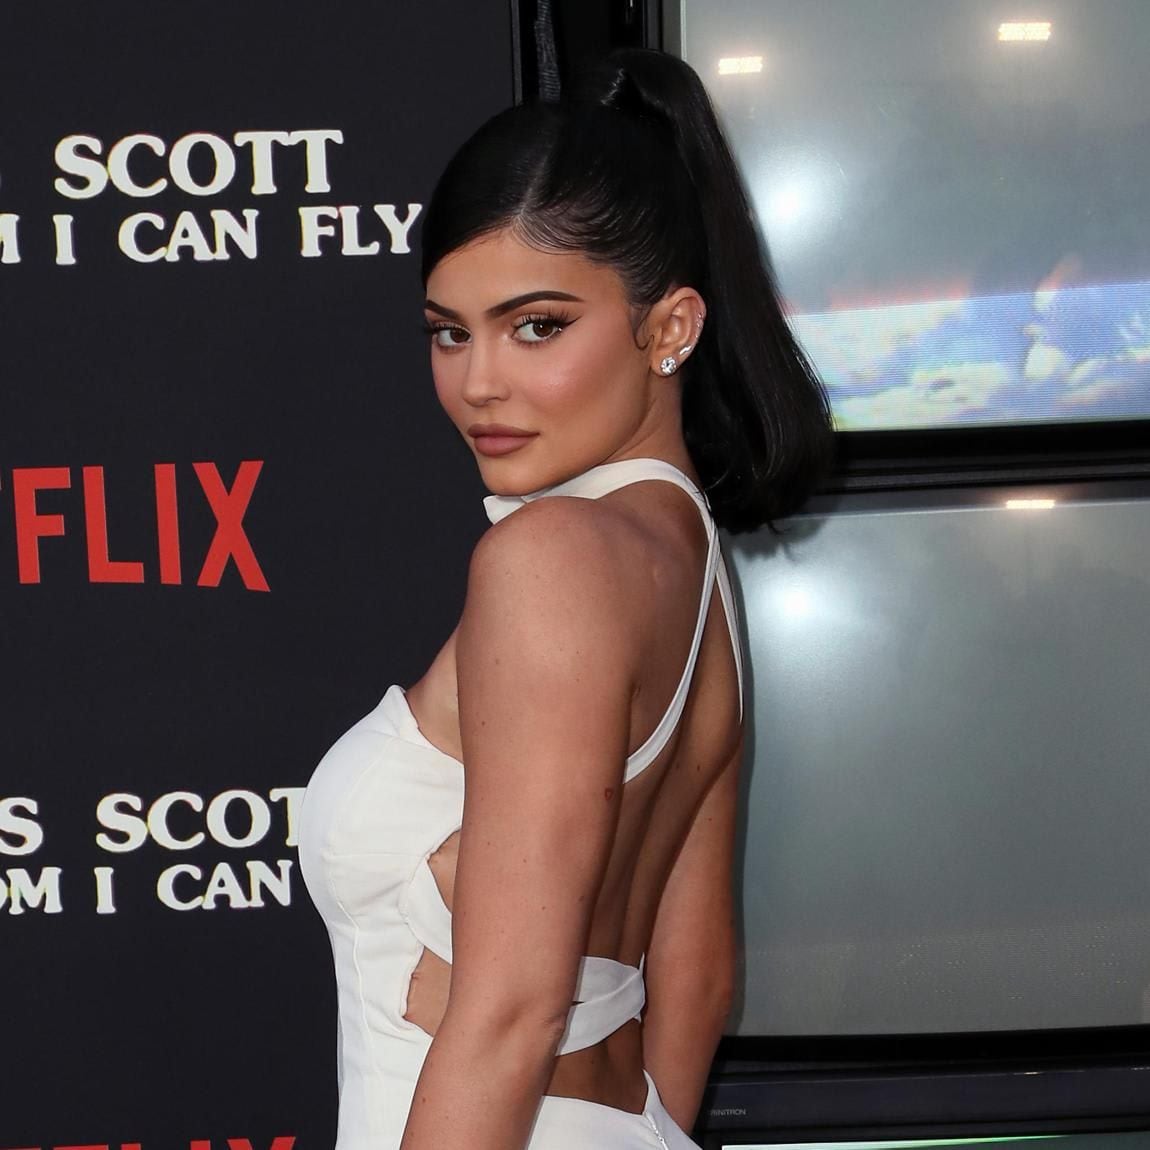 Kylie Jenner posing in profile showing off her dark ponytail wearing a white, open-back jumpsuit